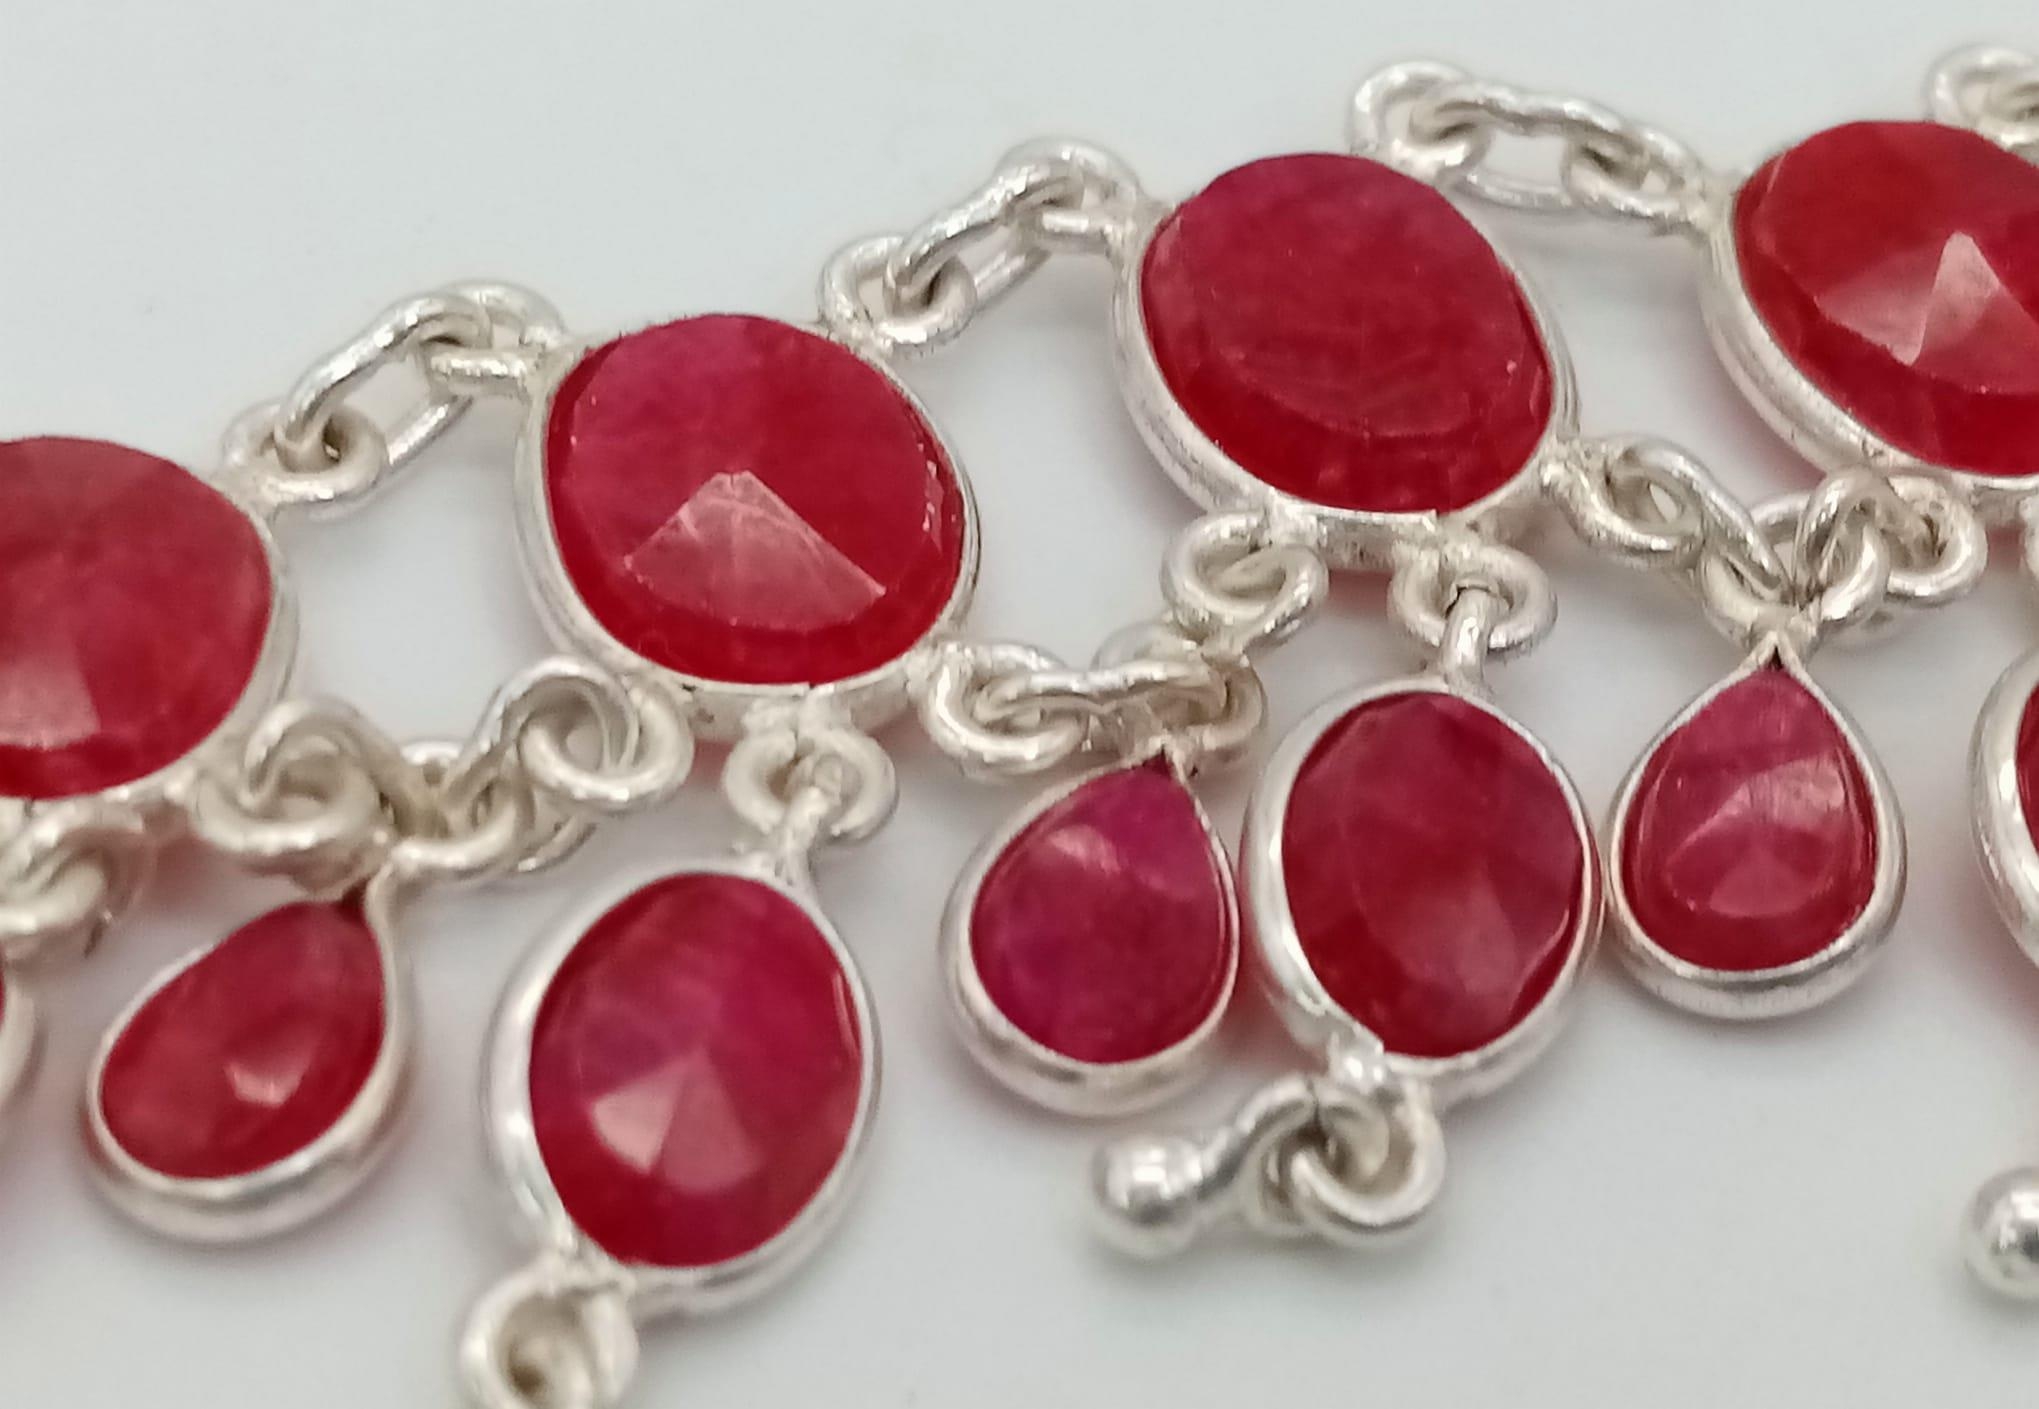 A Ruby Gemstone Choker Necklace set in 925 Silver. Two rows of oval cut rubies. 38.58g total weight. - Image 3 of 4